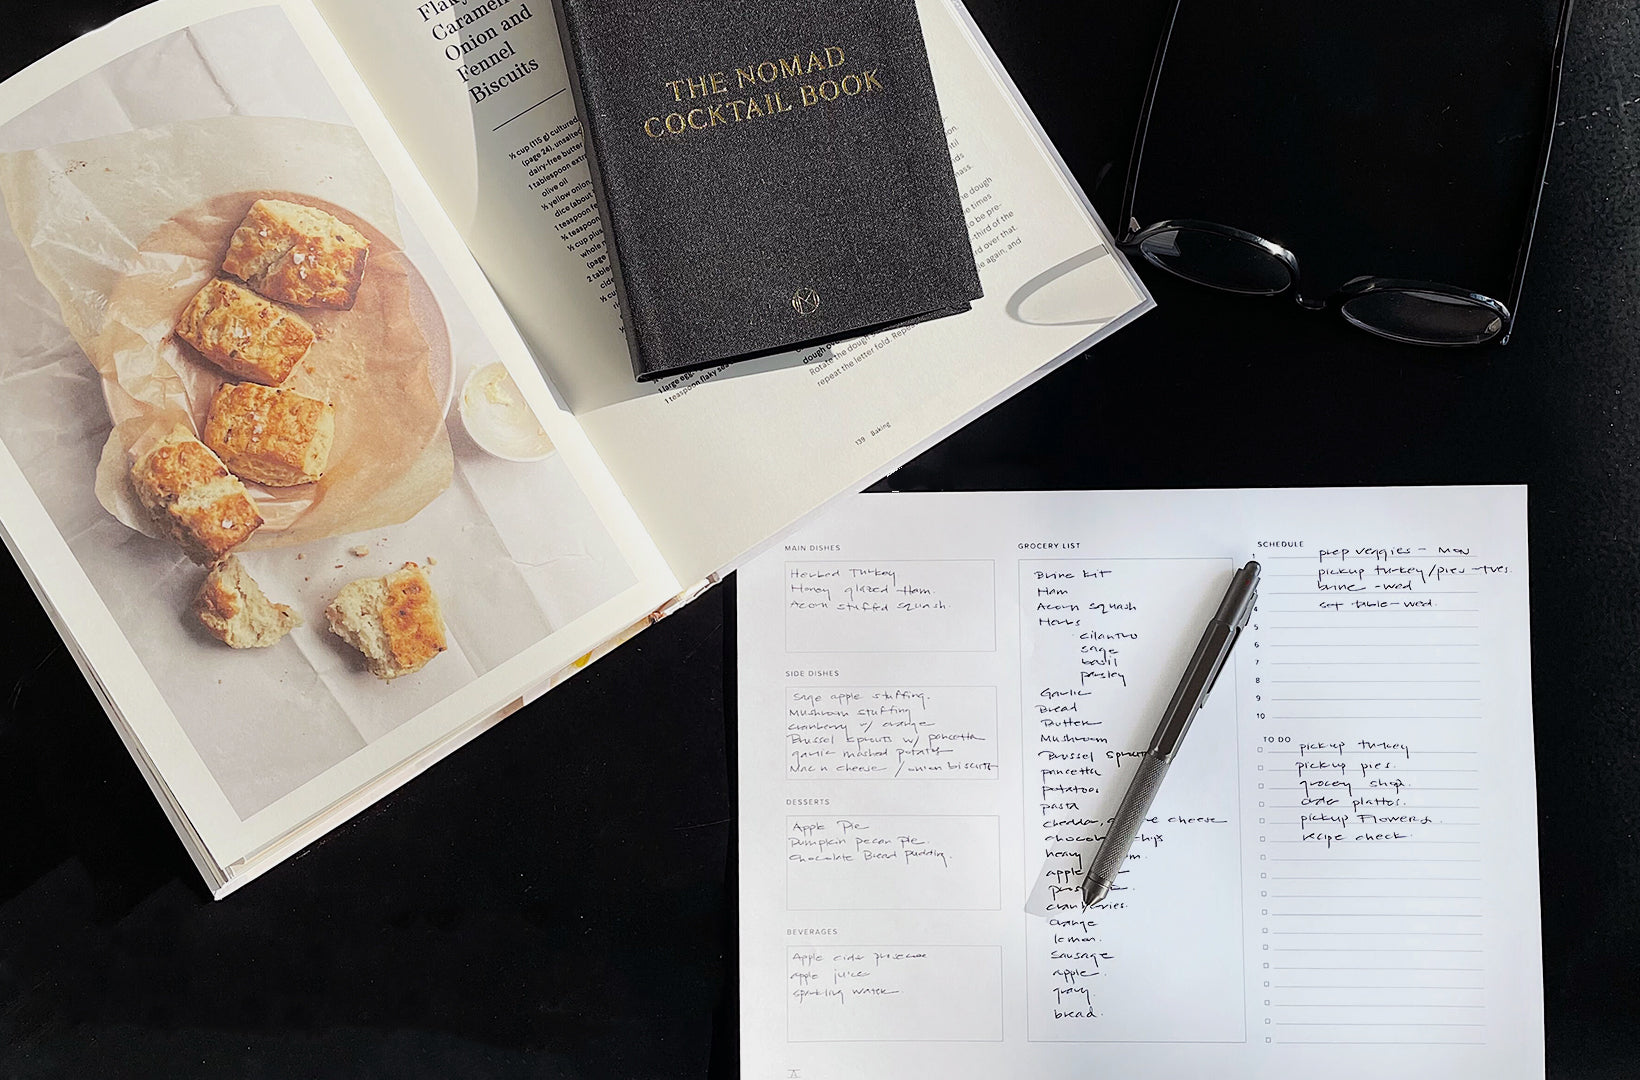 Suann uses the holiday meal planning digital download to map out her Thanksgiving menu